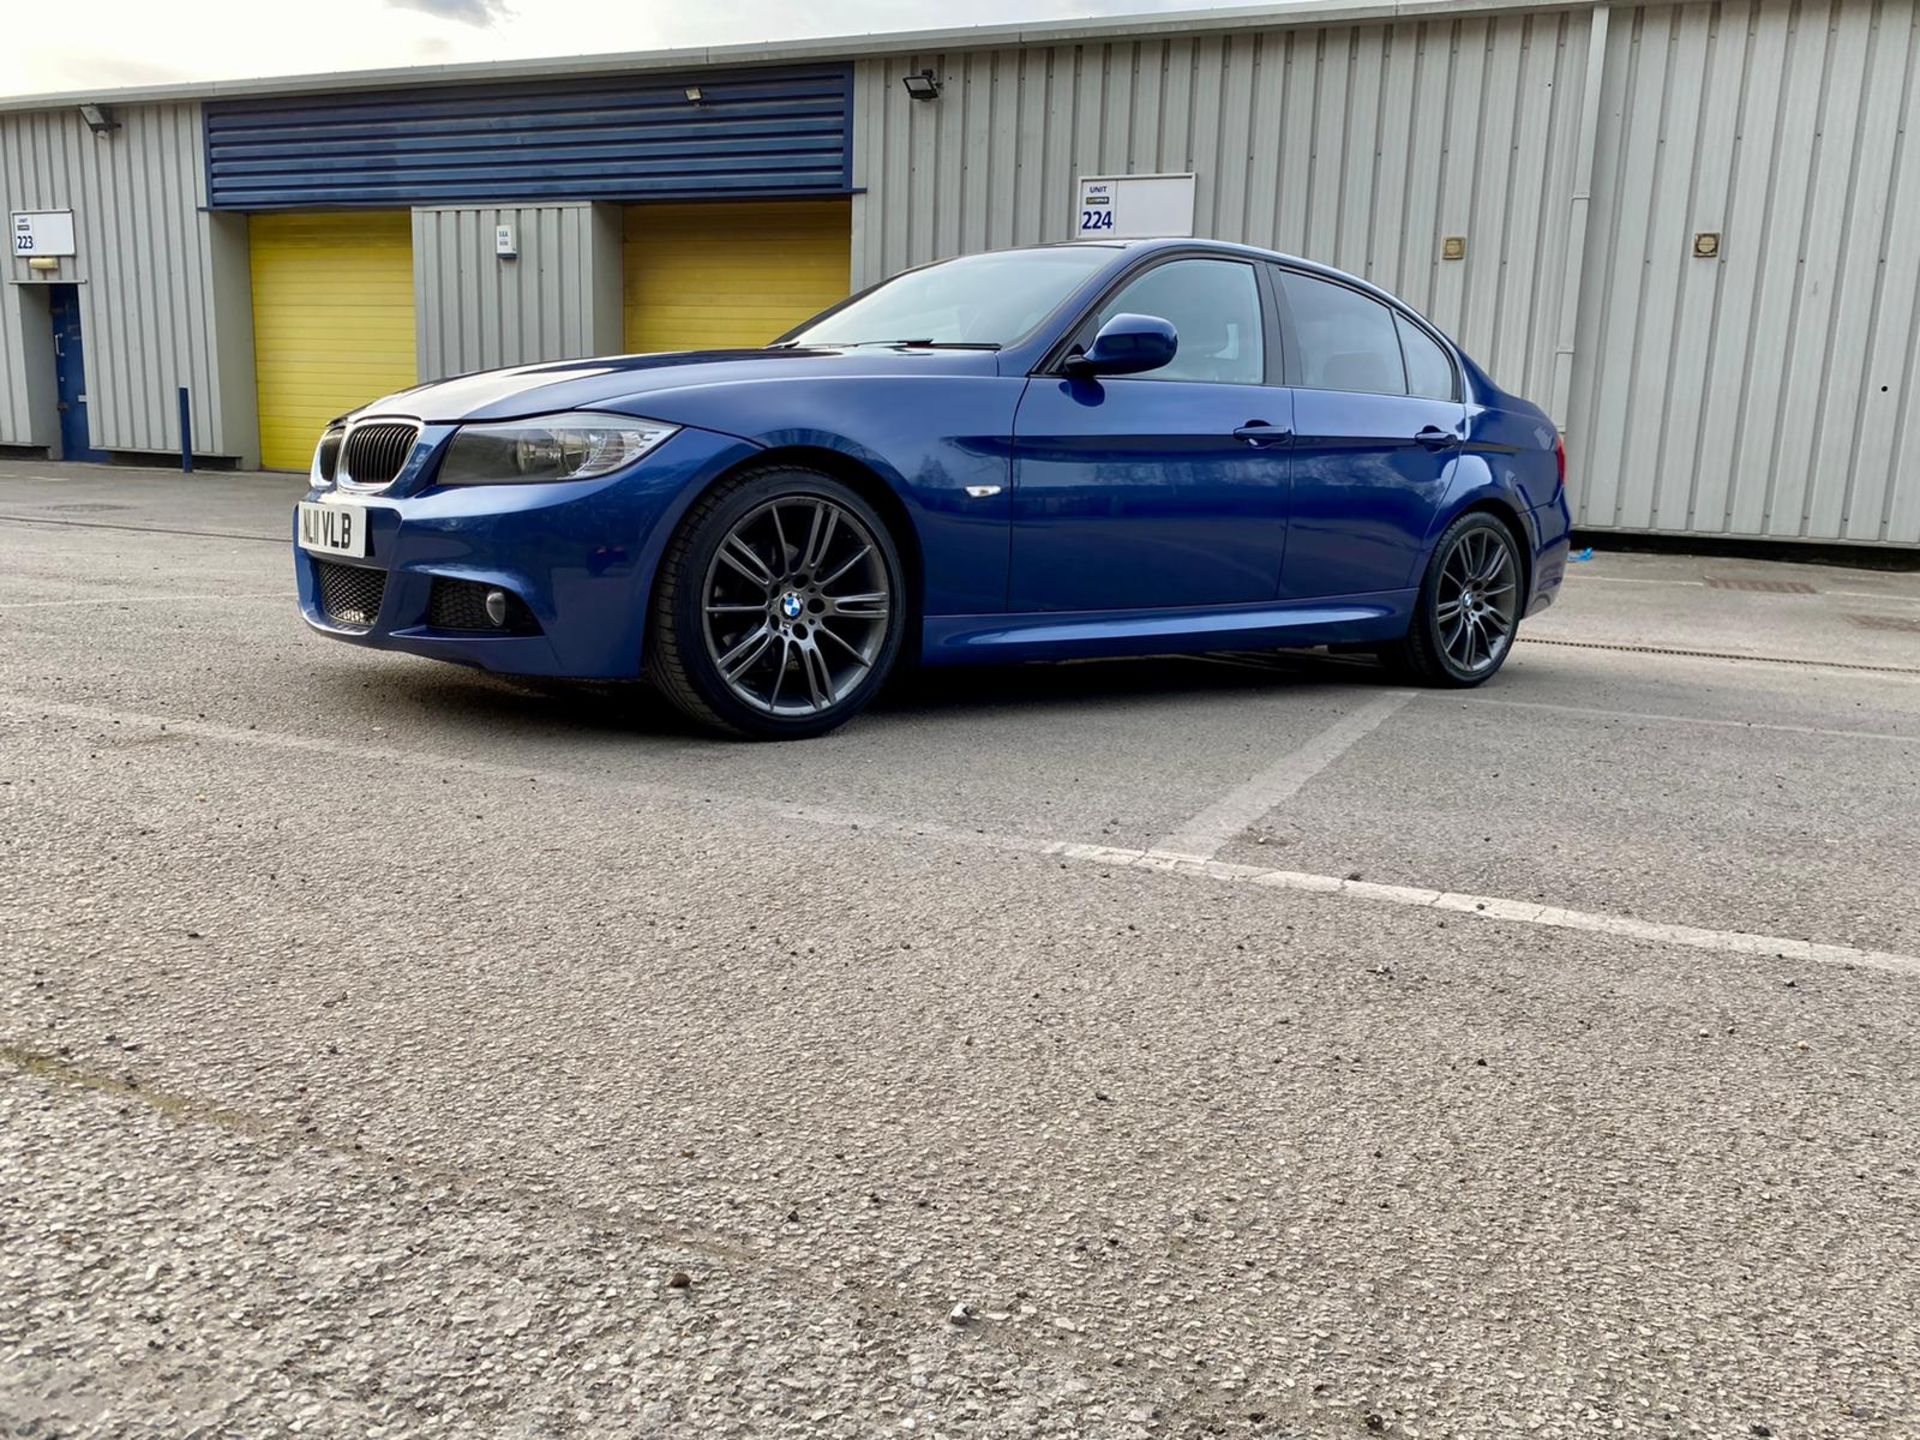 2011 BMW 318I SPORT PLUS EDITION BLUE SALOON, NEW TMING CHAIN, NEW 2 PIECE CLUTCH KIT *NO VAT* - Image 5 of 5